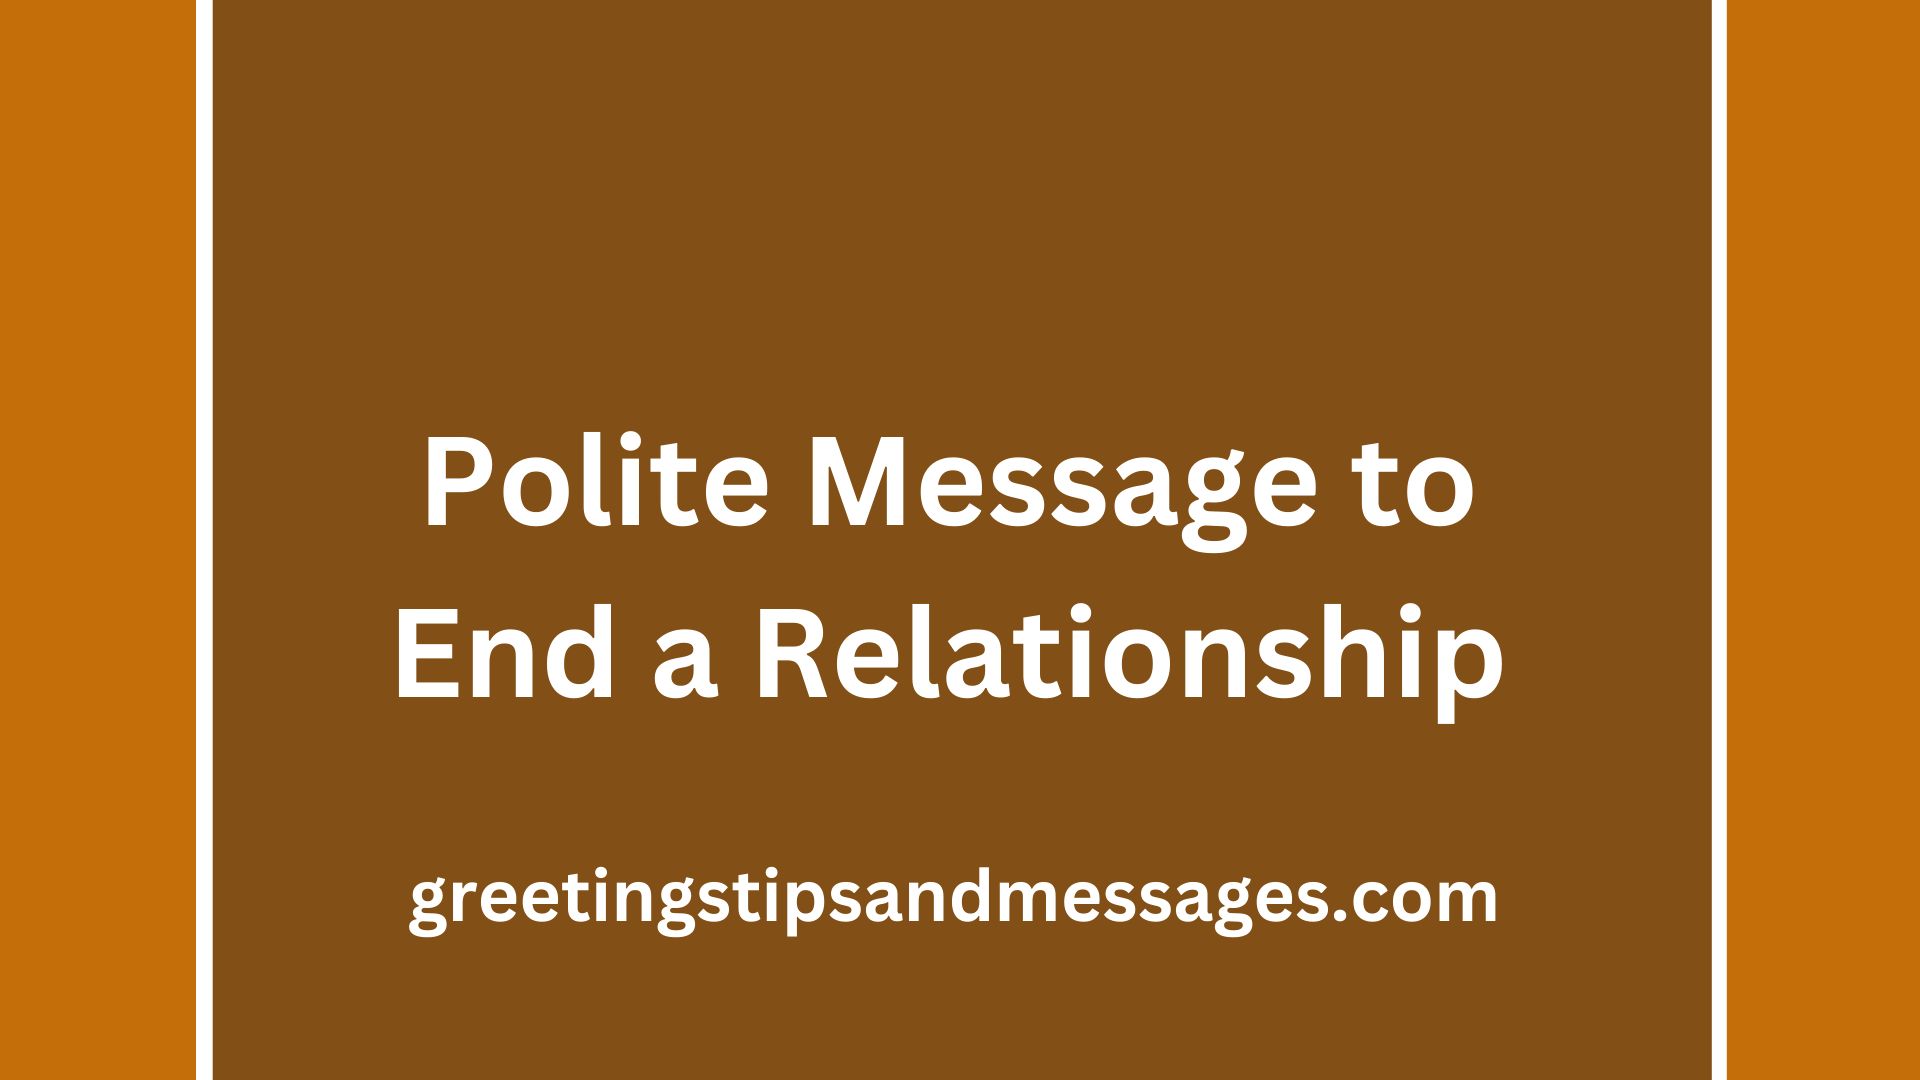 Polite Message to End a Relationship